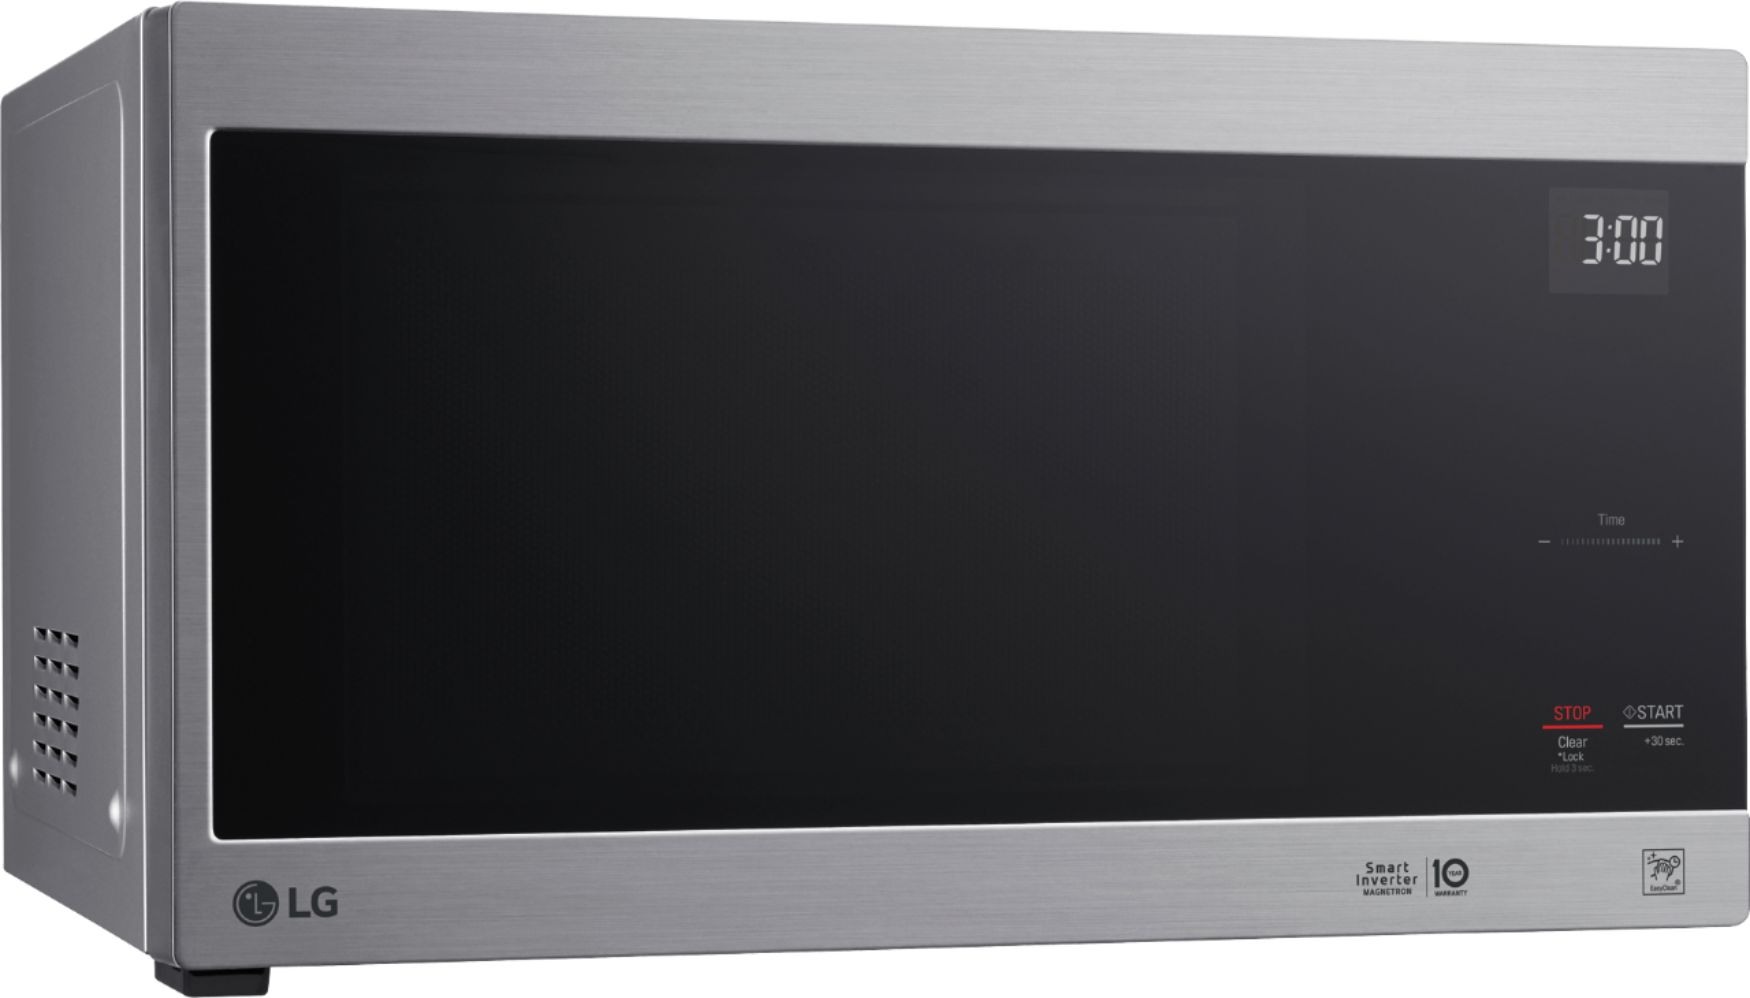 Angle View: LG - NeoChef 1.5 Cu. Ft. Countertop Microwave with Sensor Cooking and EasyClean - Stainless Steel